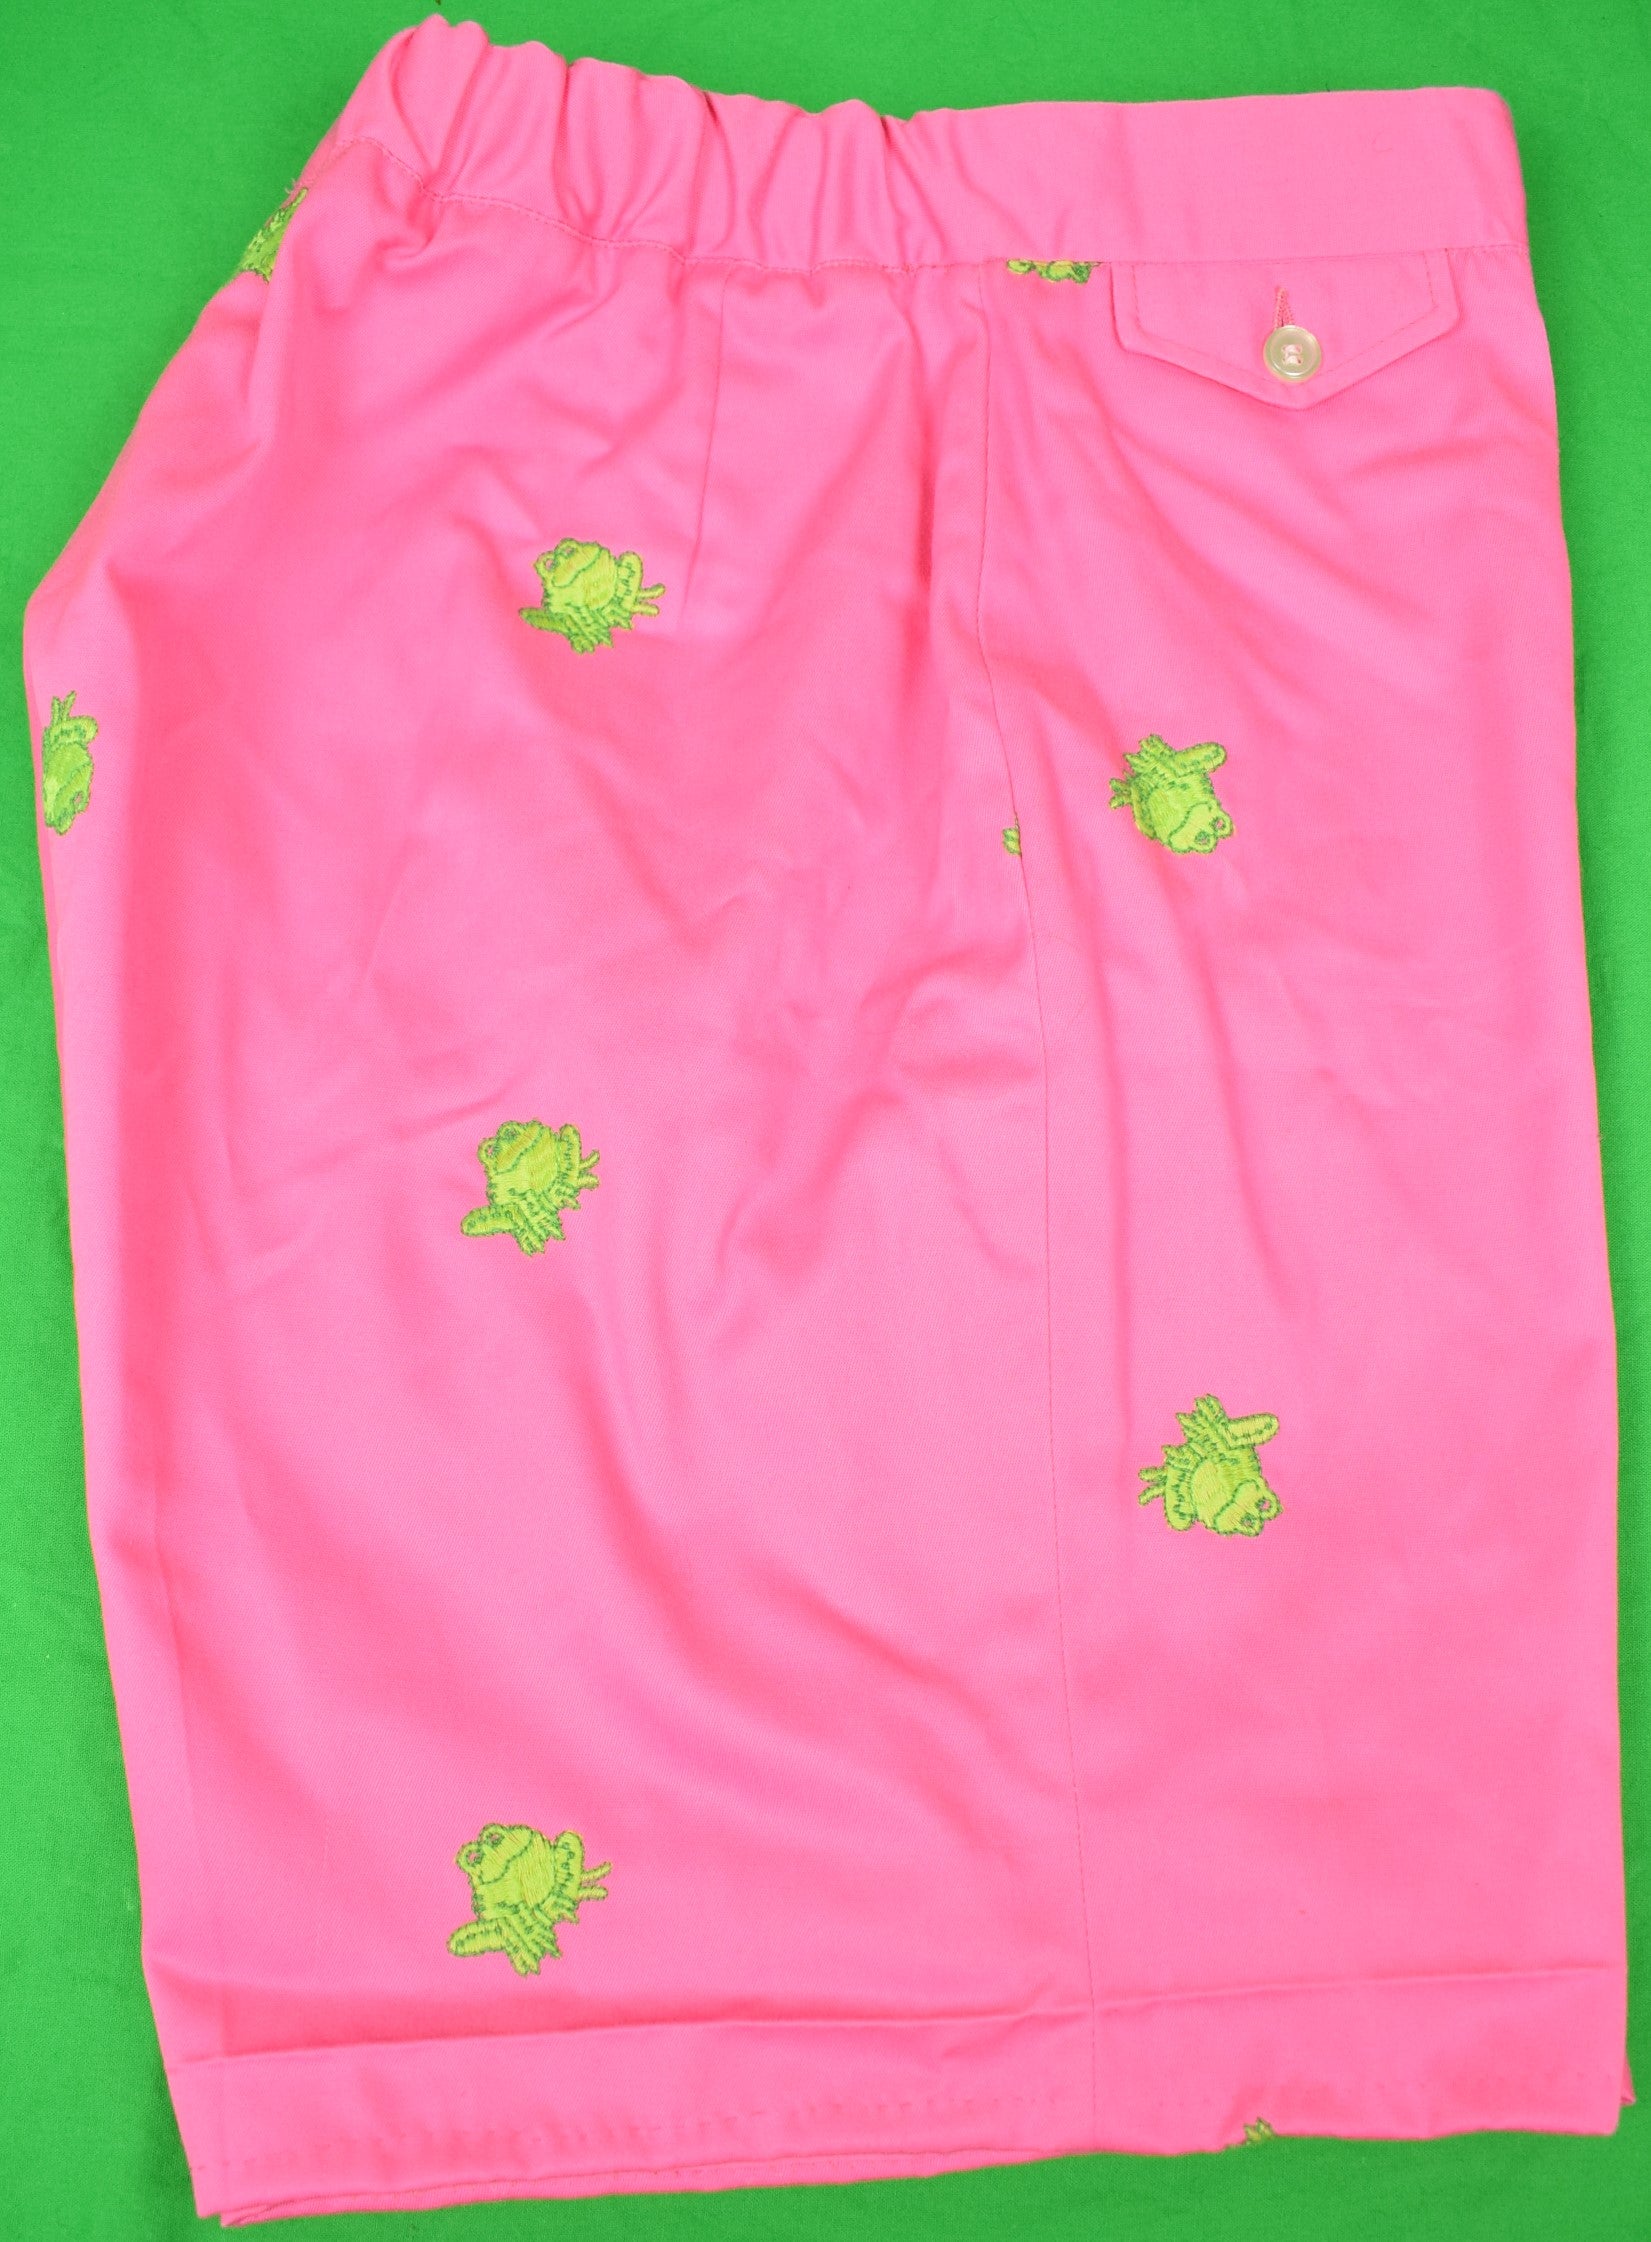 Chipp Hot Pink Chino Shorts w/ Embroidered Lime Green Frogs Sz: 32